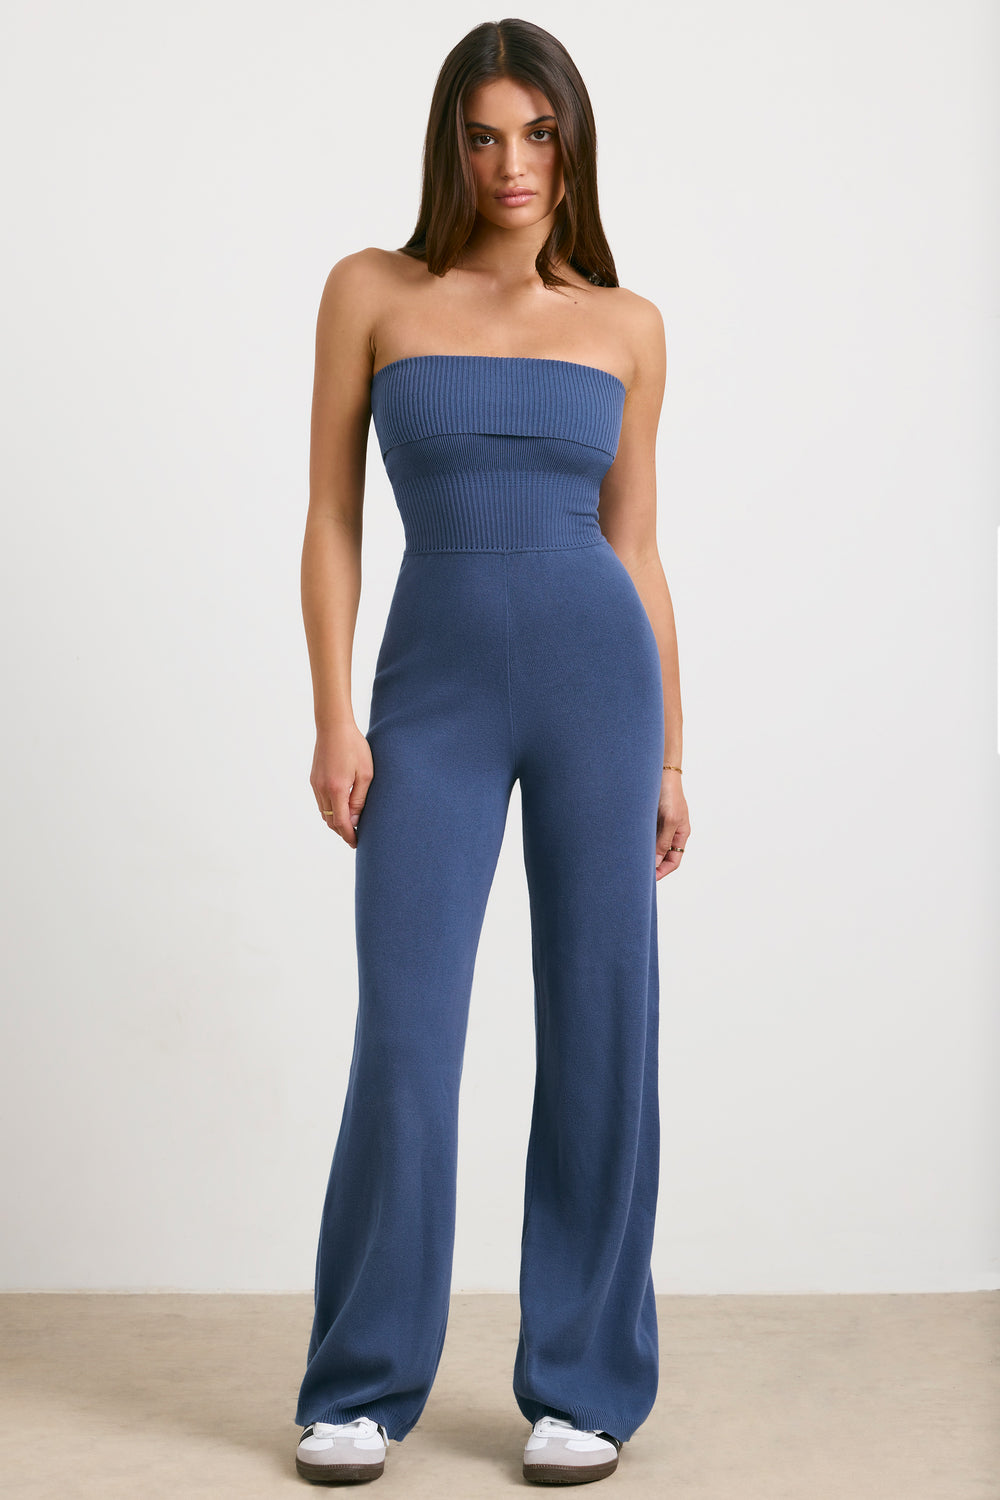 Timeless - Petite Chunky Knit Kick Flare Unitard in Washed Navy